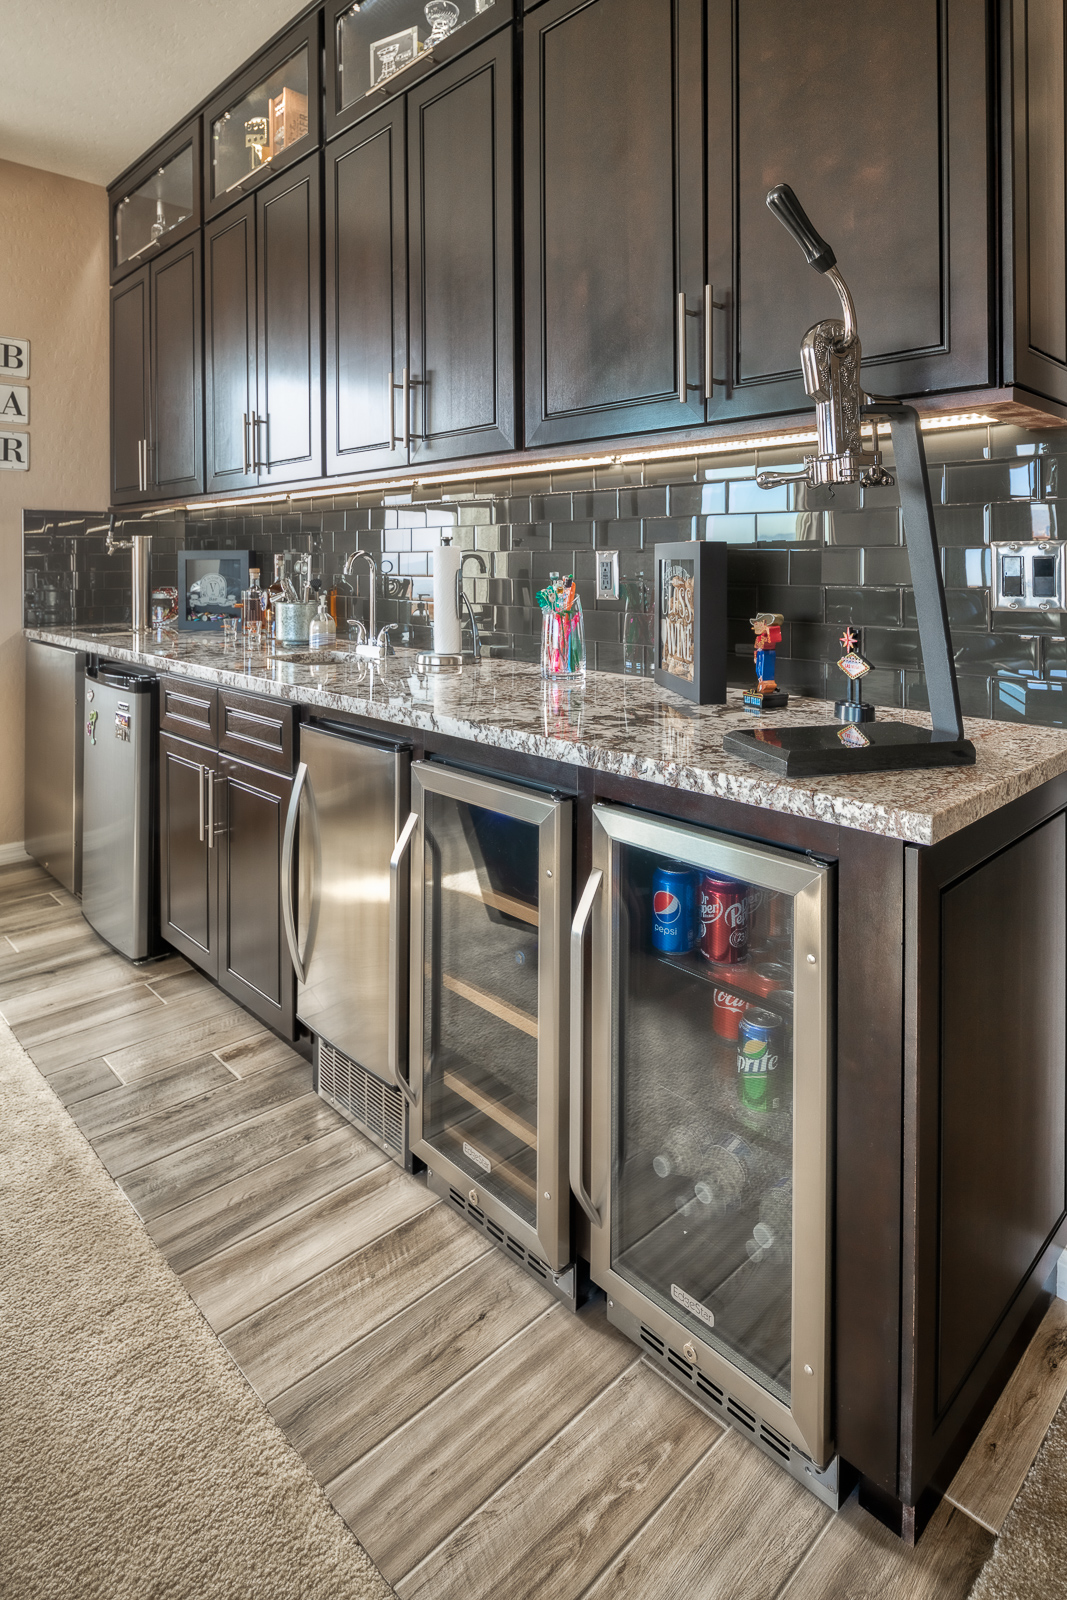 Kitchen Remodels Photo Gallery - Southern Vegas Valley Contracting